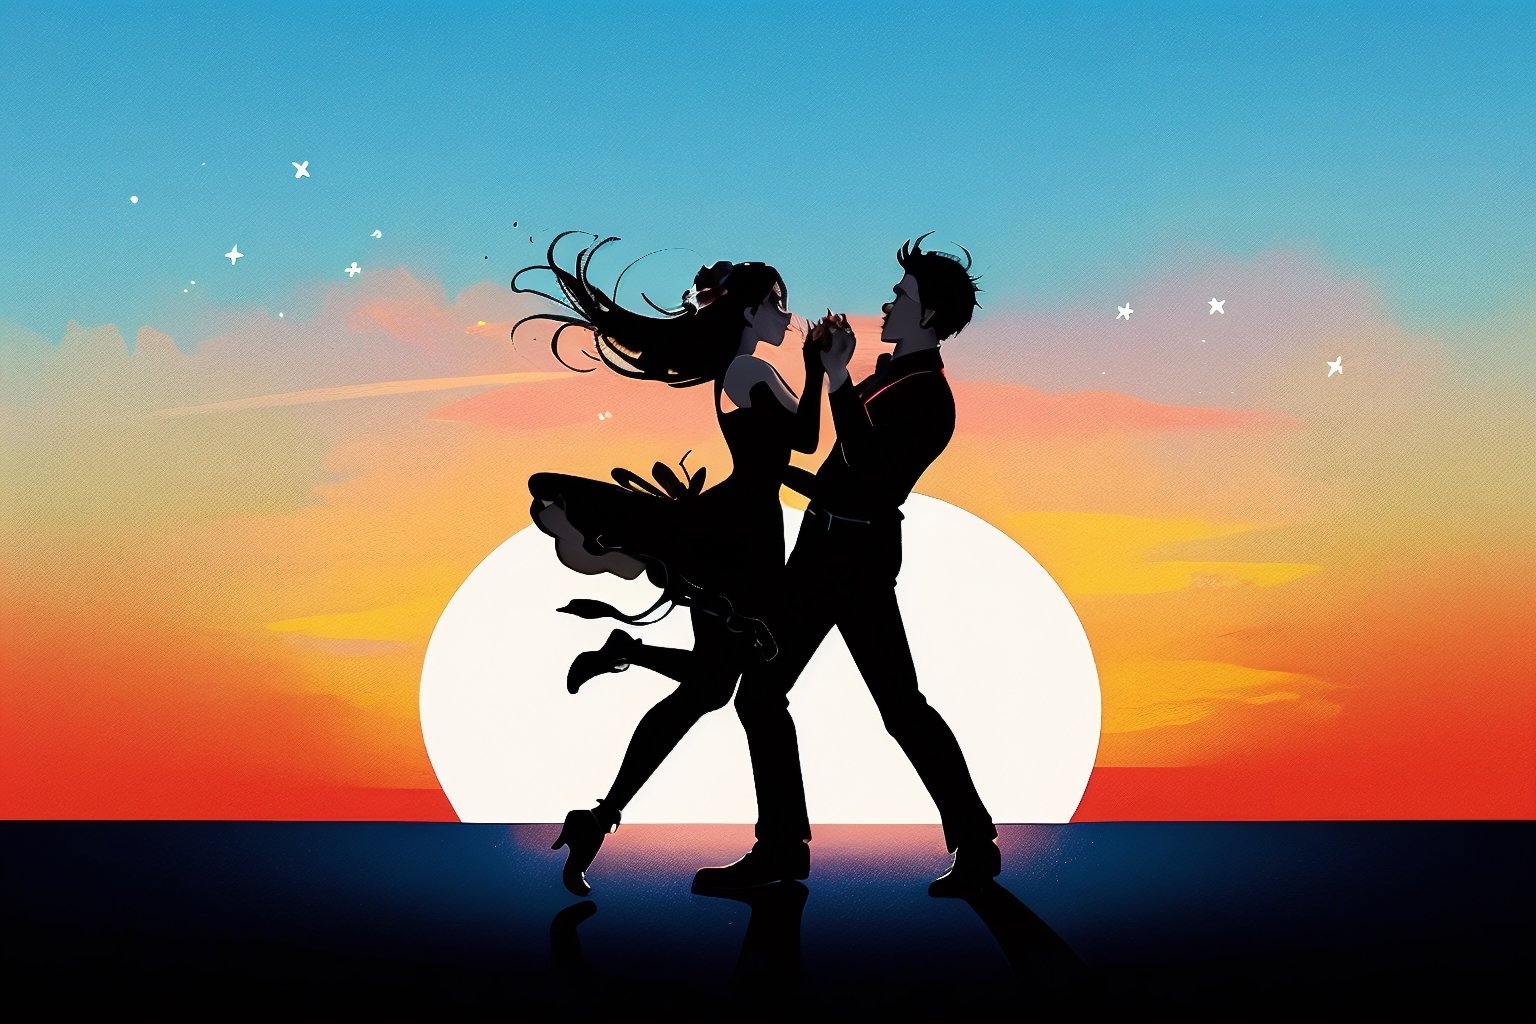 Dark silhowette of a couple dancing, against a single  five pointed star against a sunset background, colorful,1 line drawing